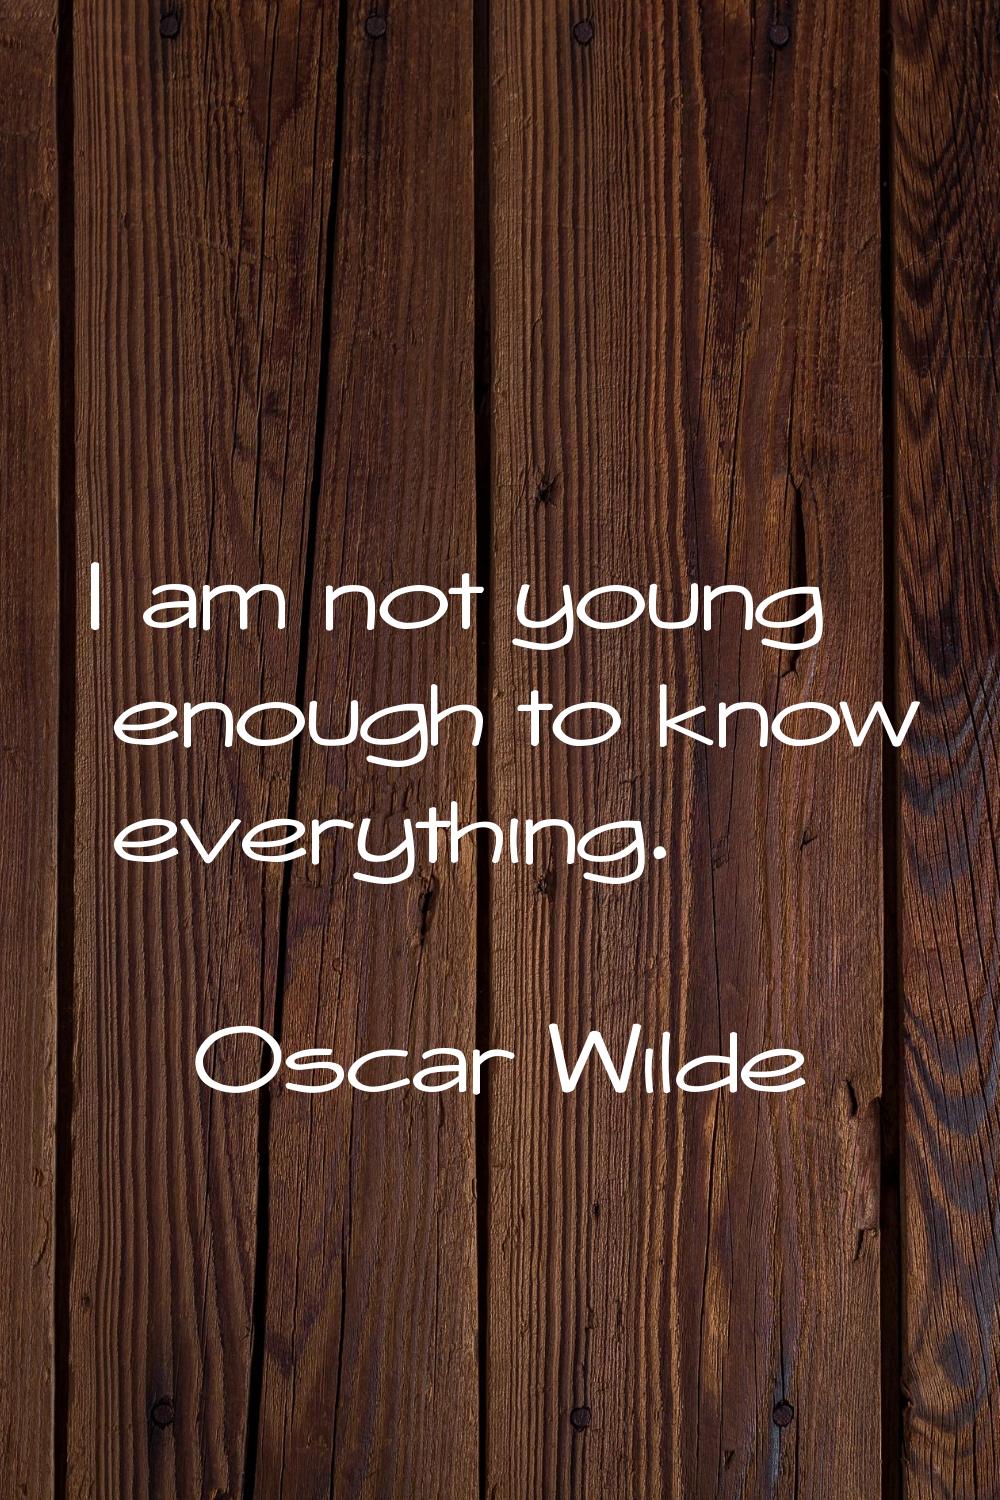 I am not young enough to know everything.